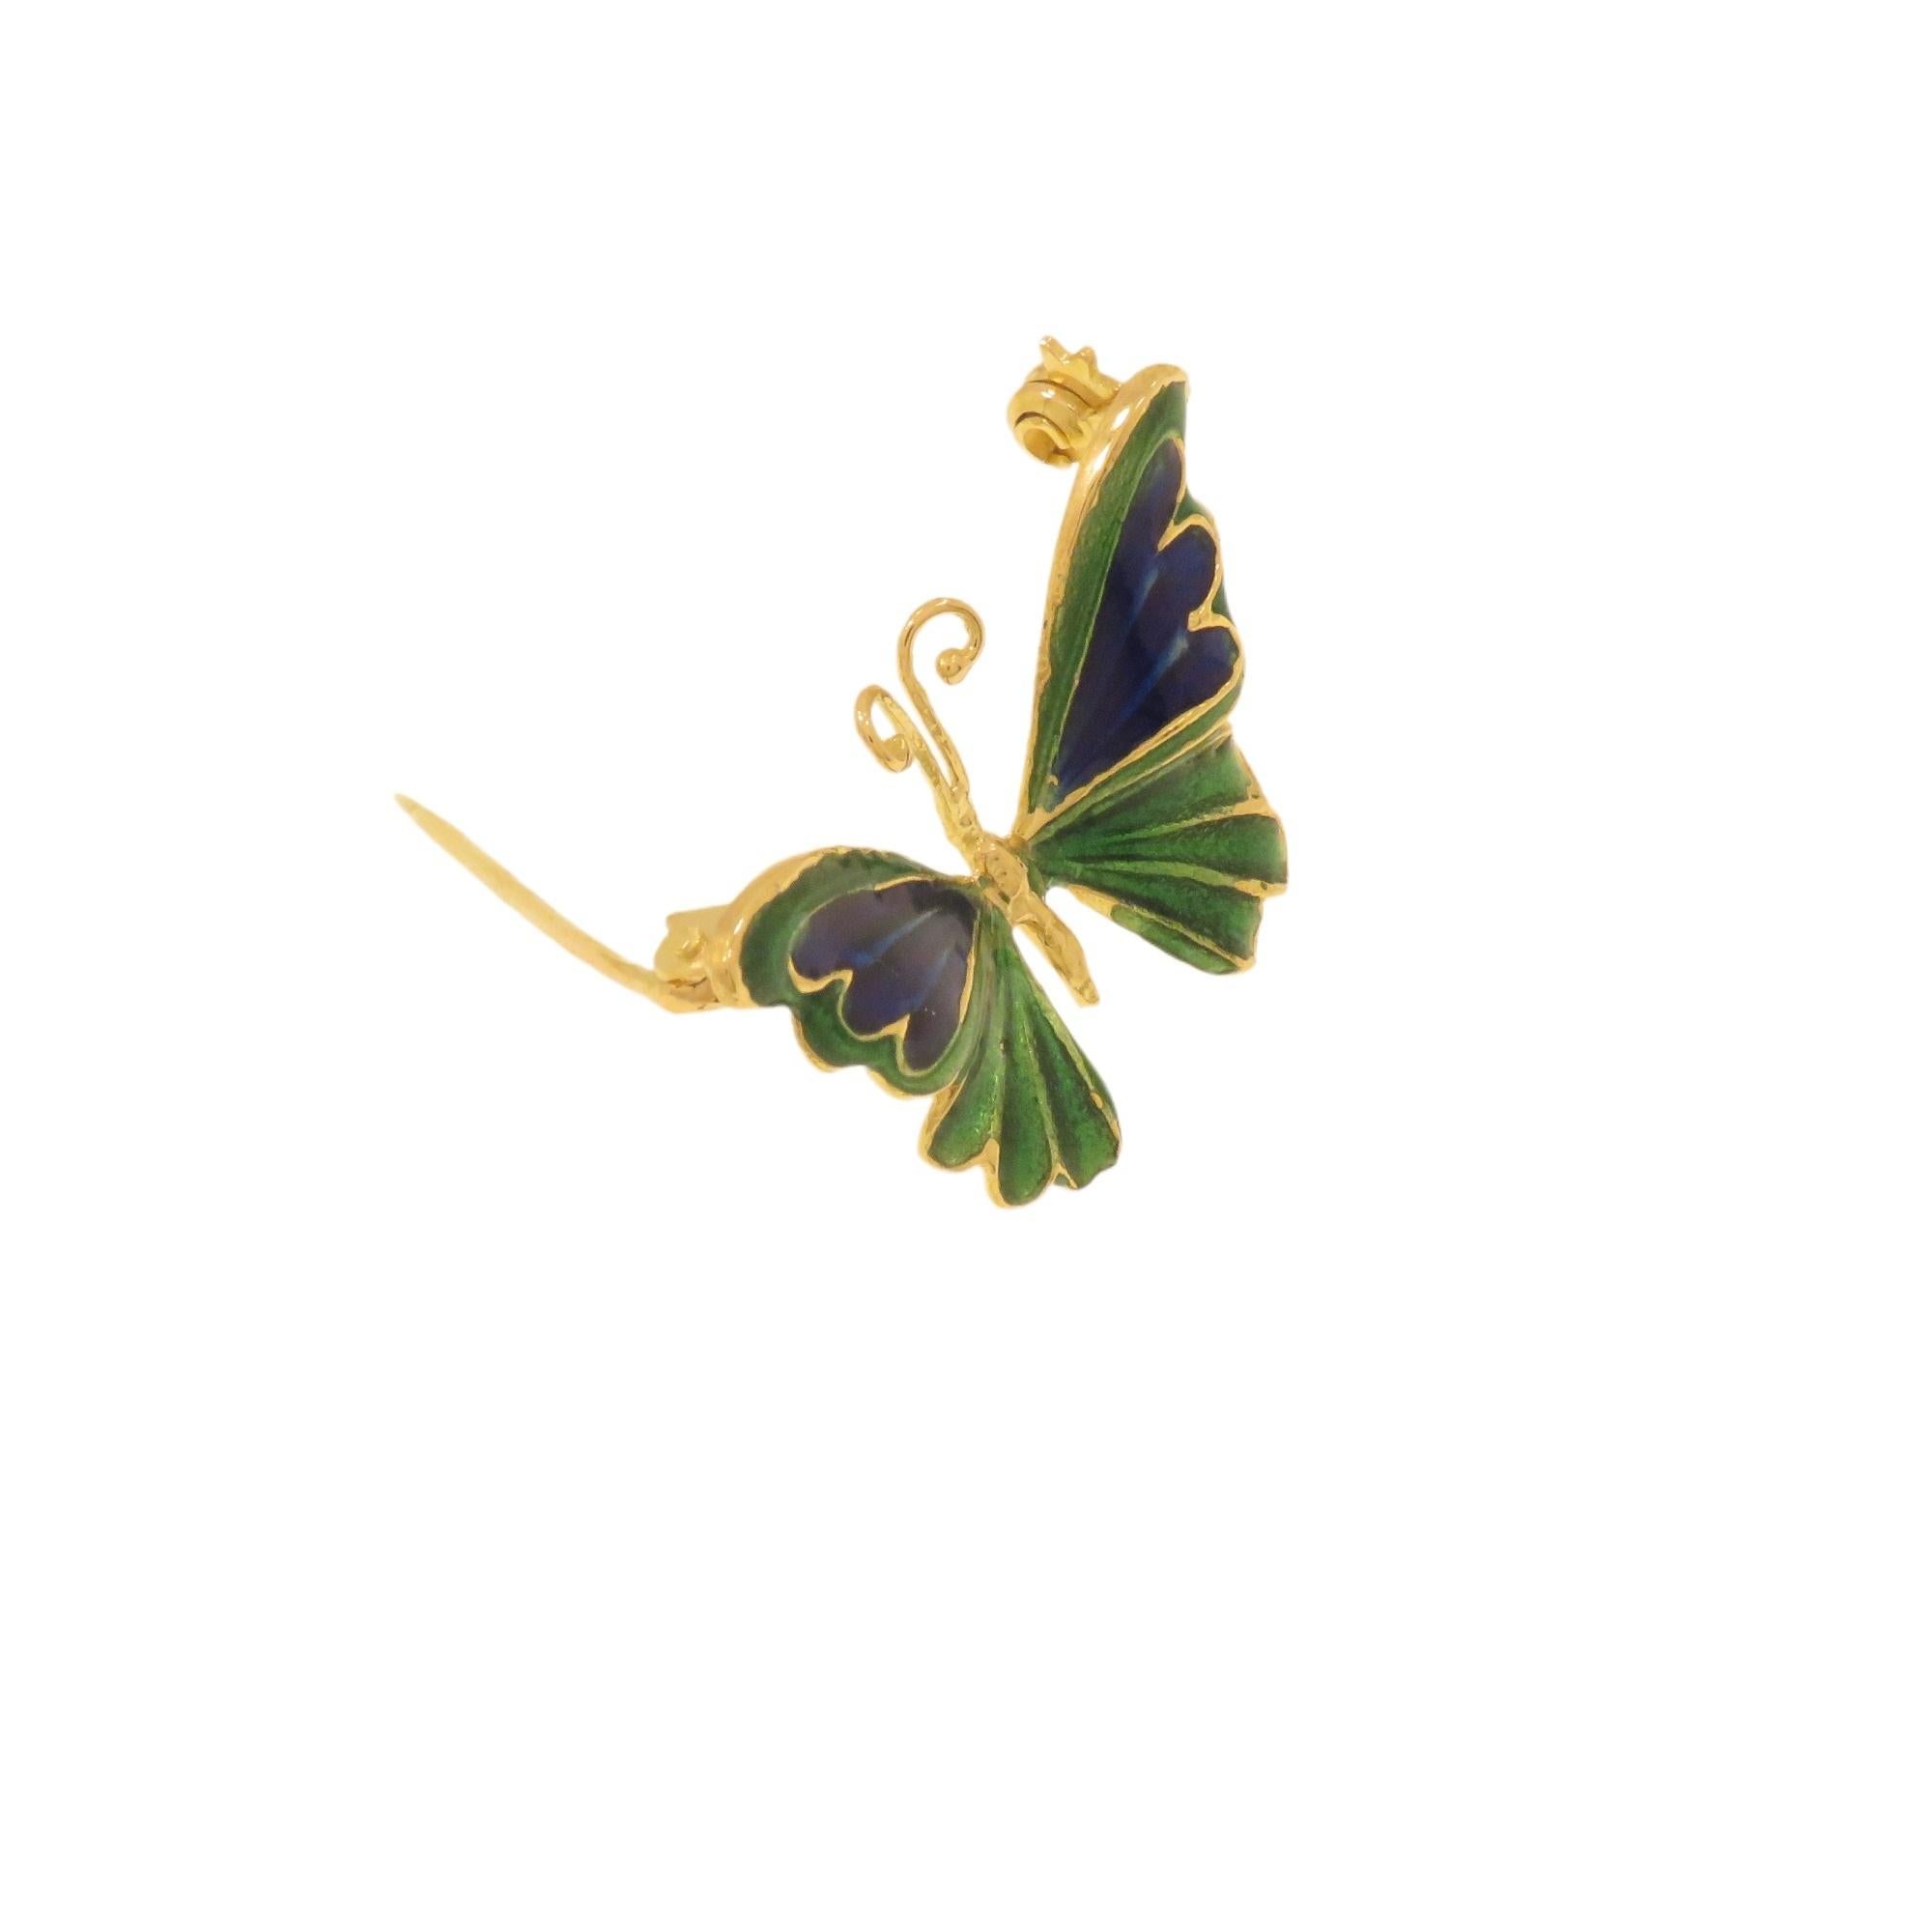 Lovely enamel 18 karat yellow gold butterfly vintage brooch in shades of green and blue. The size is 33x21 mm / 1.299x0.826 inches. The pin is straight fastening with a safety clasp. Marked with the Italian Mark Gold 750.

Handcrafted in: 18 karat